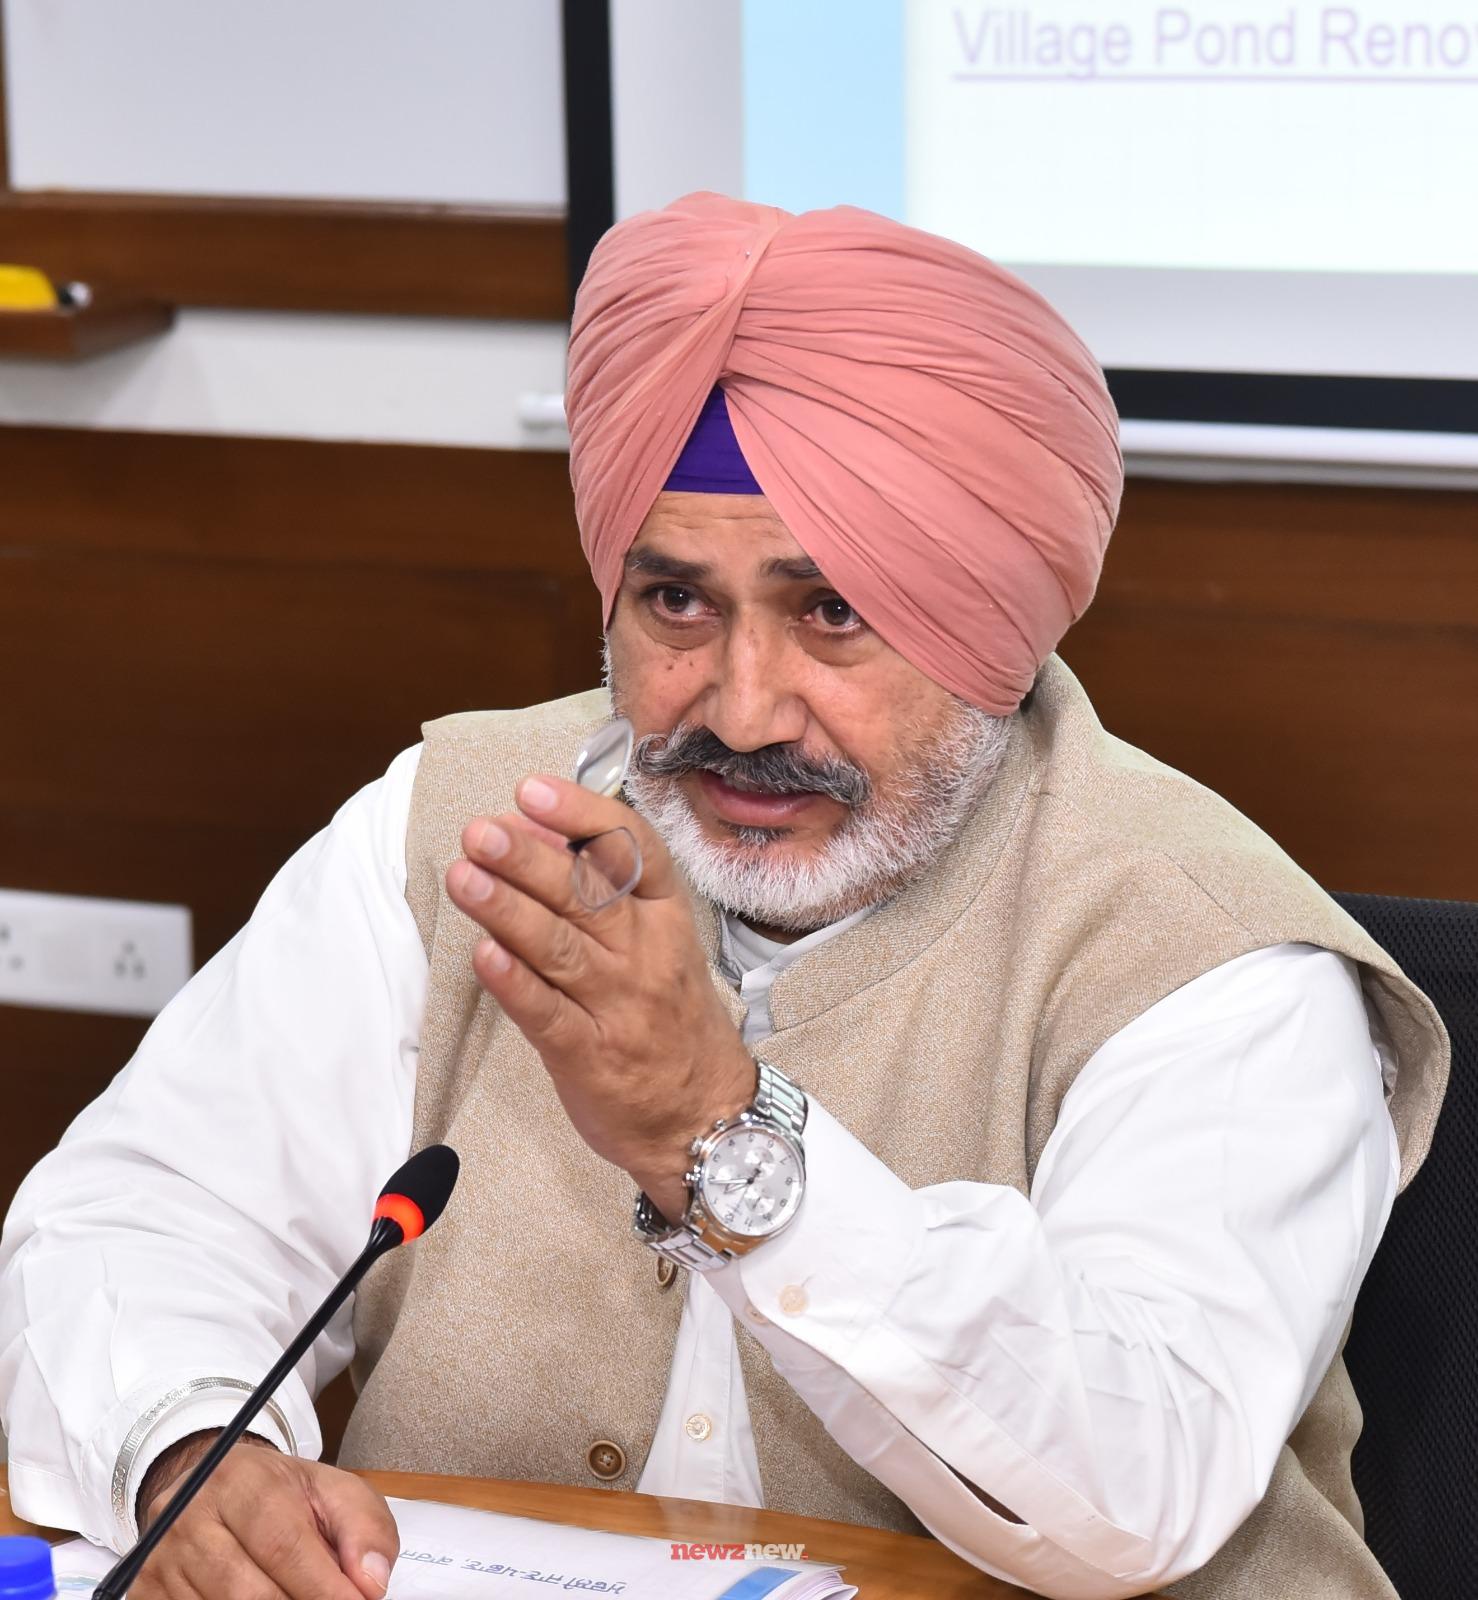 Mann Government committed to providing alternative agro-irrigation facilities in addition to tubewells, asserts Chetan Singh Jauramajra